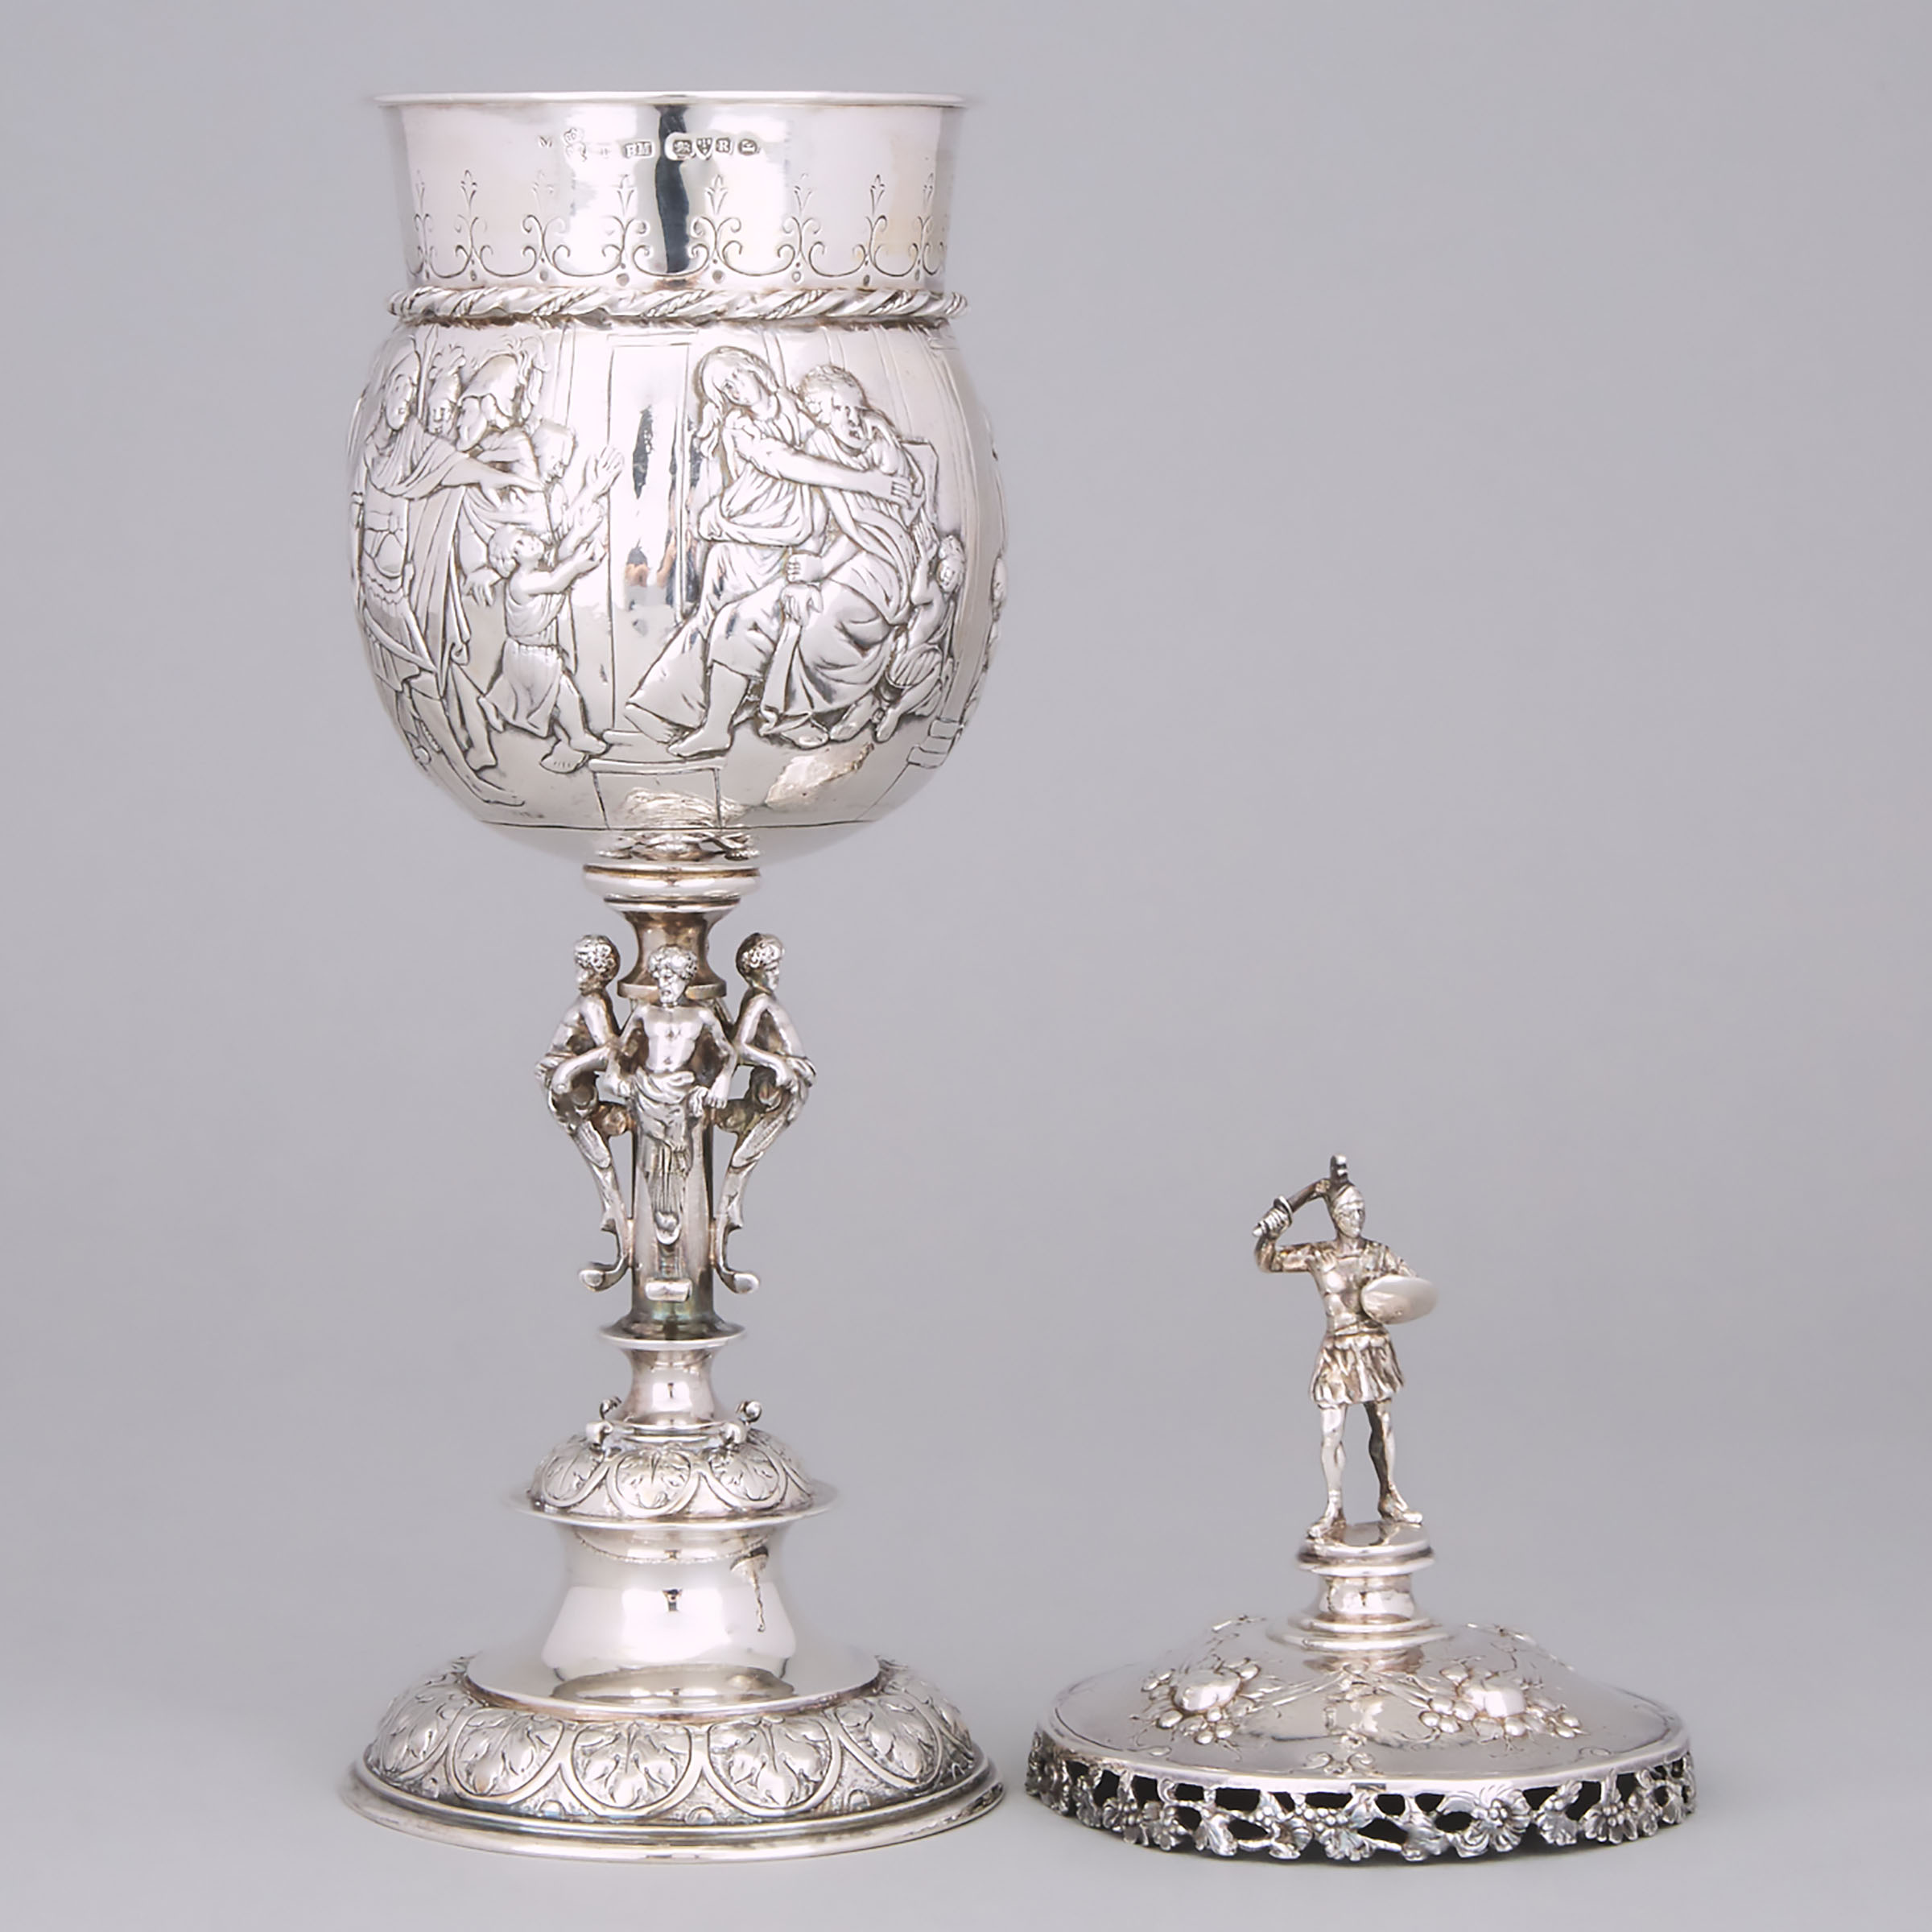 German Silver Standing Cup and Cover, Georg Roth & Co. or Wolf & Knell, Hanau, c.1900